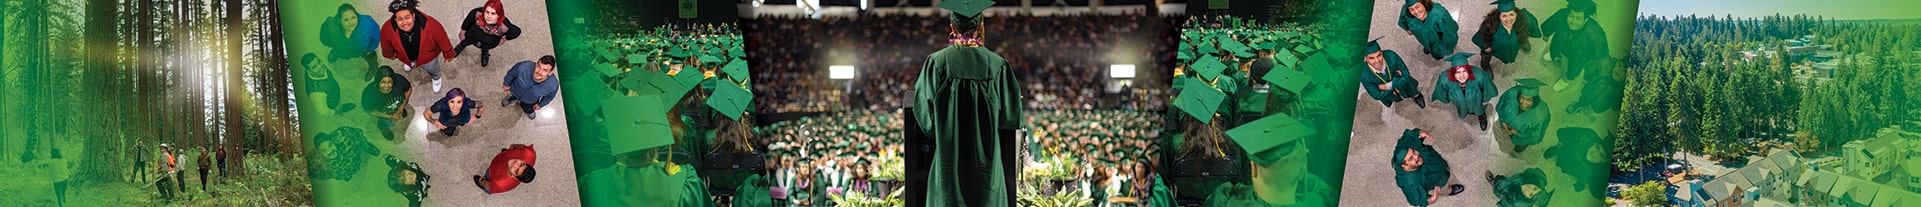 A  student speaking at a commencement ceremony.